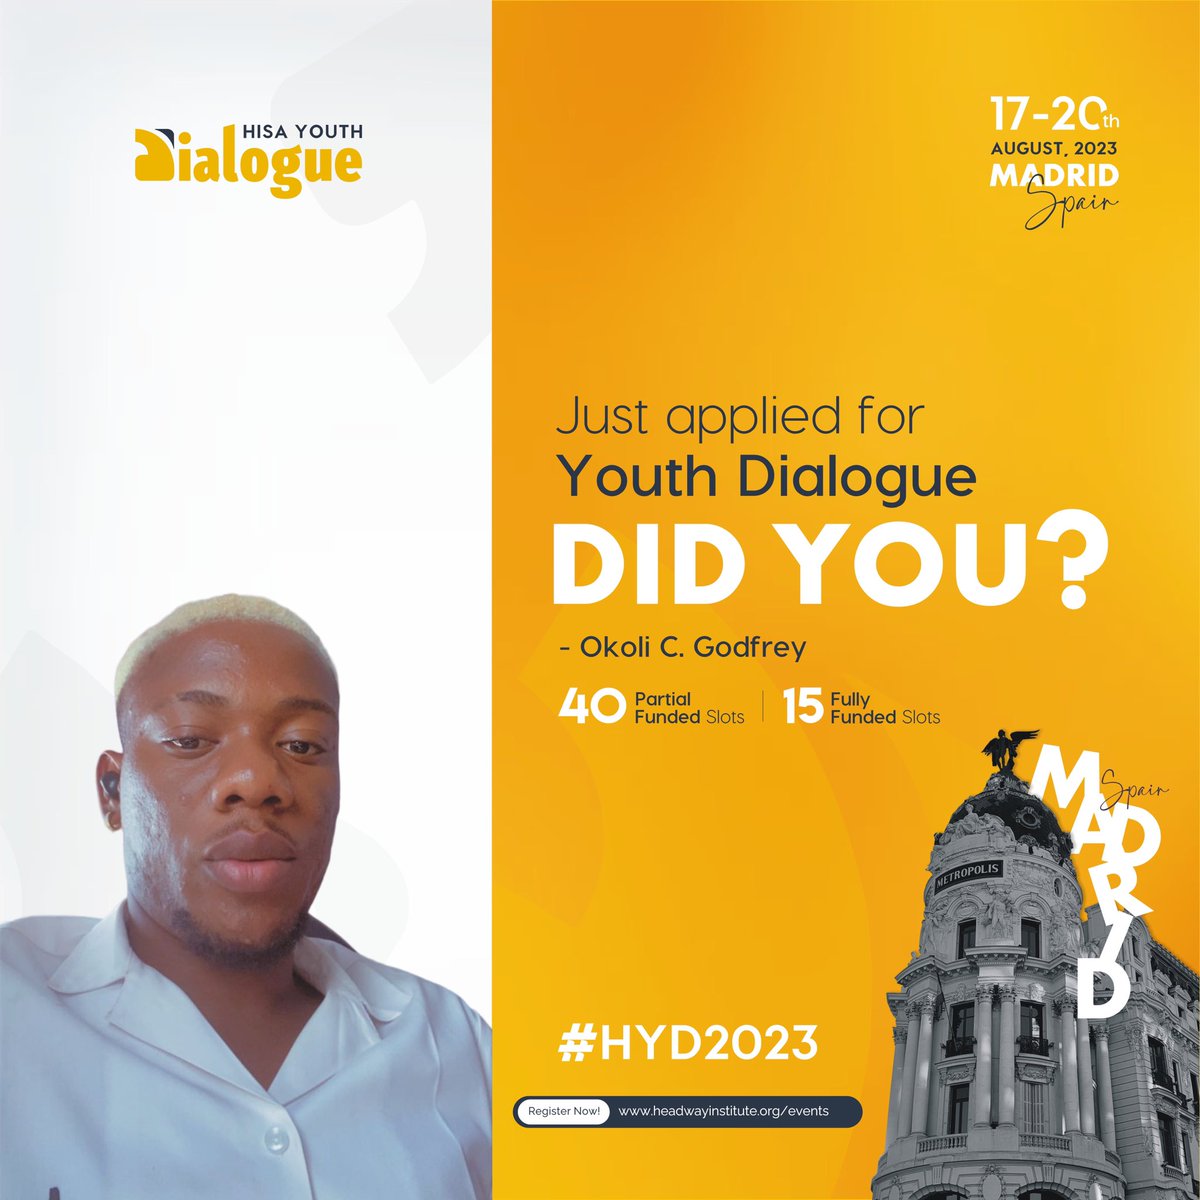 #HYD2023 #HISA #youthdialogue #hisayouthdialogue
 
“Hi everyone, I am so excited to announce that I have applied to be one of 15 Fully Funded Delegates to attend HISA Youth Dialogue 2023 and yes, you can be one of those 15 Fully Funded Visit headwayinstitute.org/hisa-youth-dia…